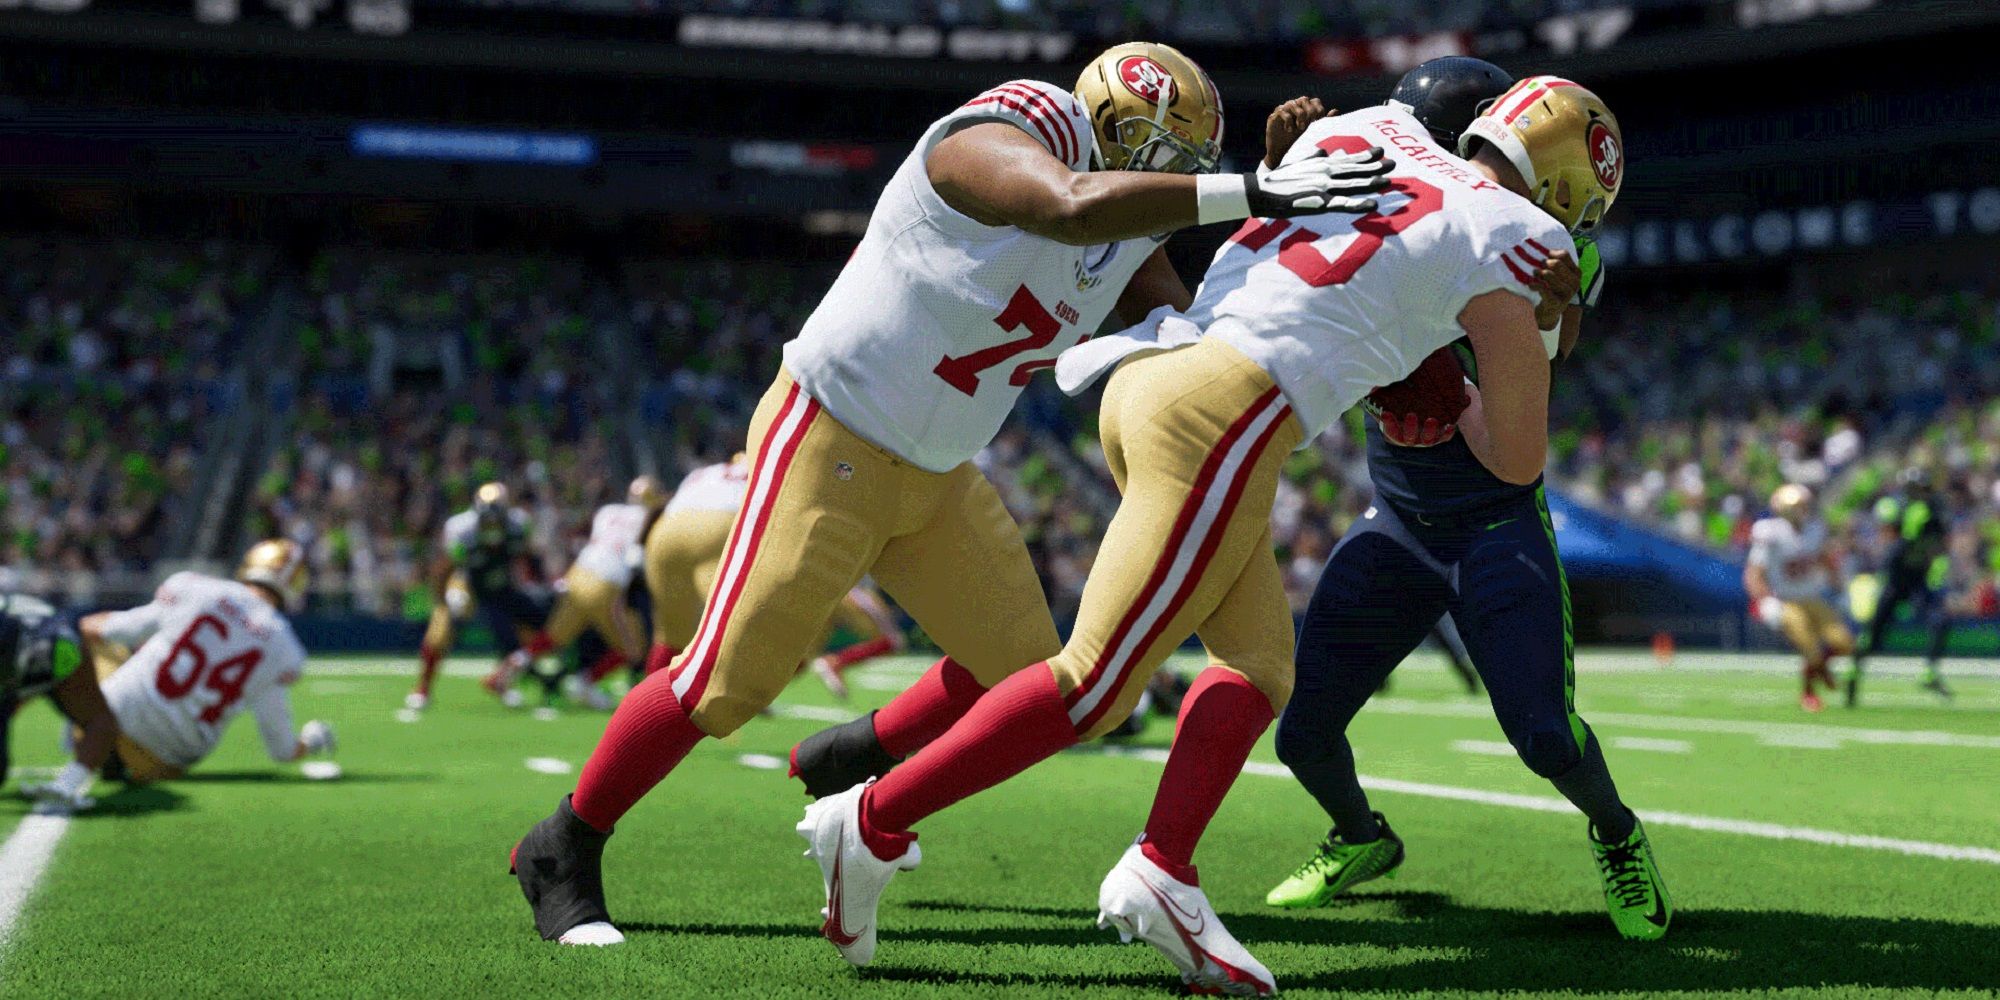 Celebrate The Launch Of Madden 24 With An Exclusive Xbox Series S